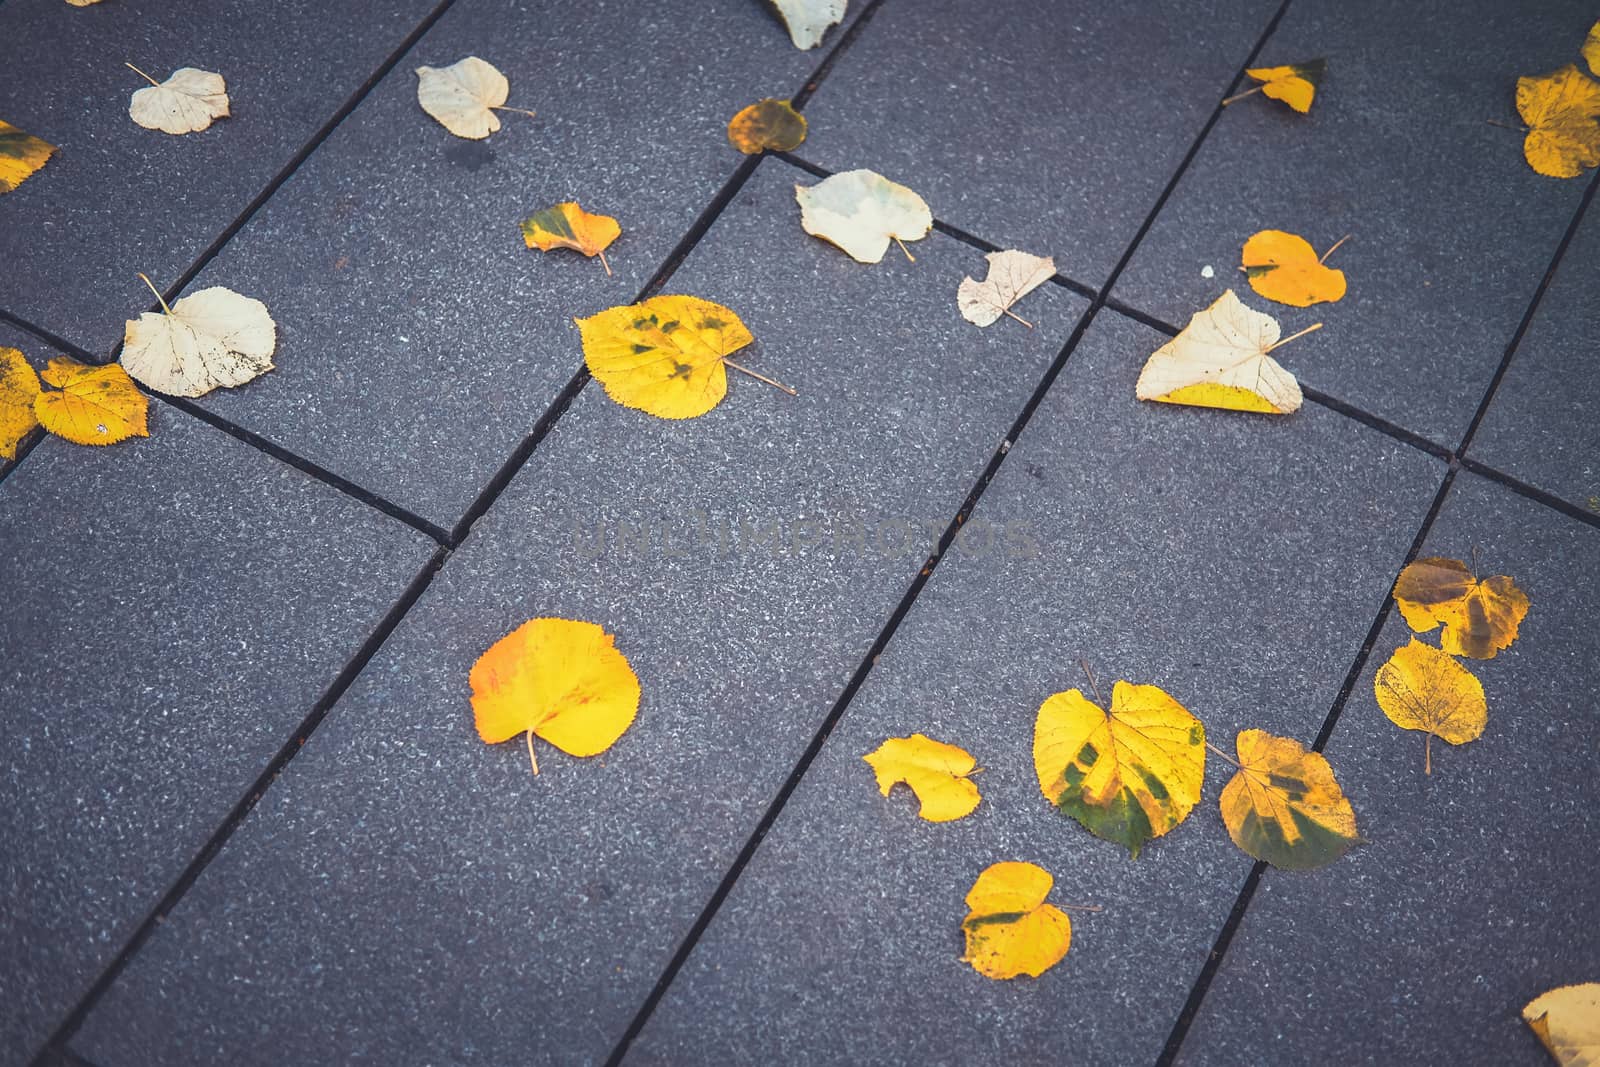 Yellow leaves cover street floor after autumn fall